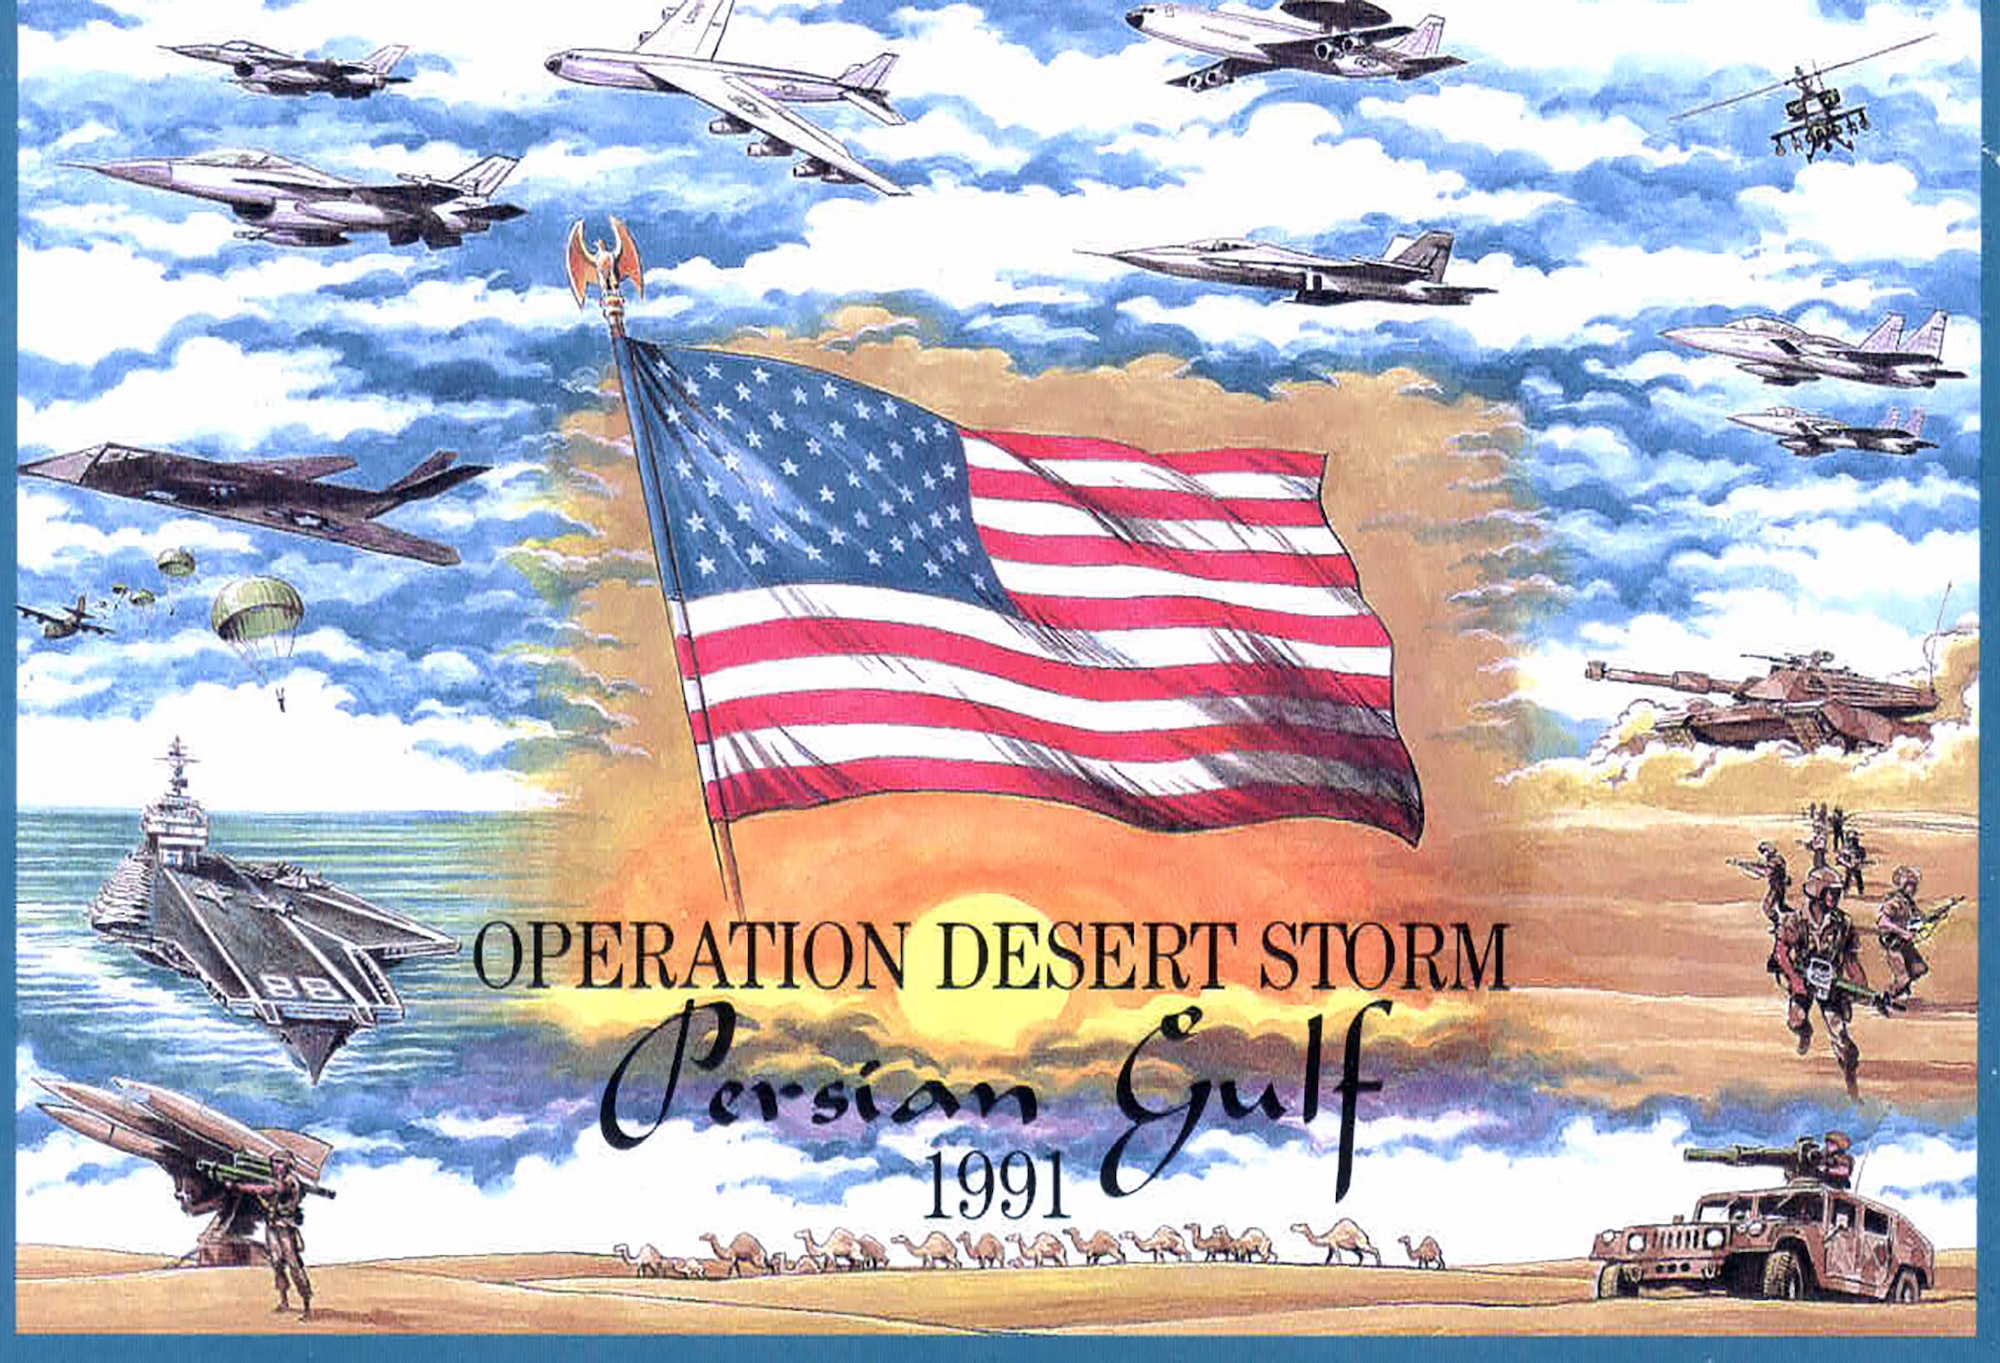 This postcard was sold at a mini base exchange set up for those deployed supporting Operation Desert Storm. The mini BX was a tent that sold snacks, drinks, toiletries and other necessities for the deployed Airmen.